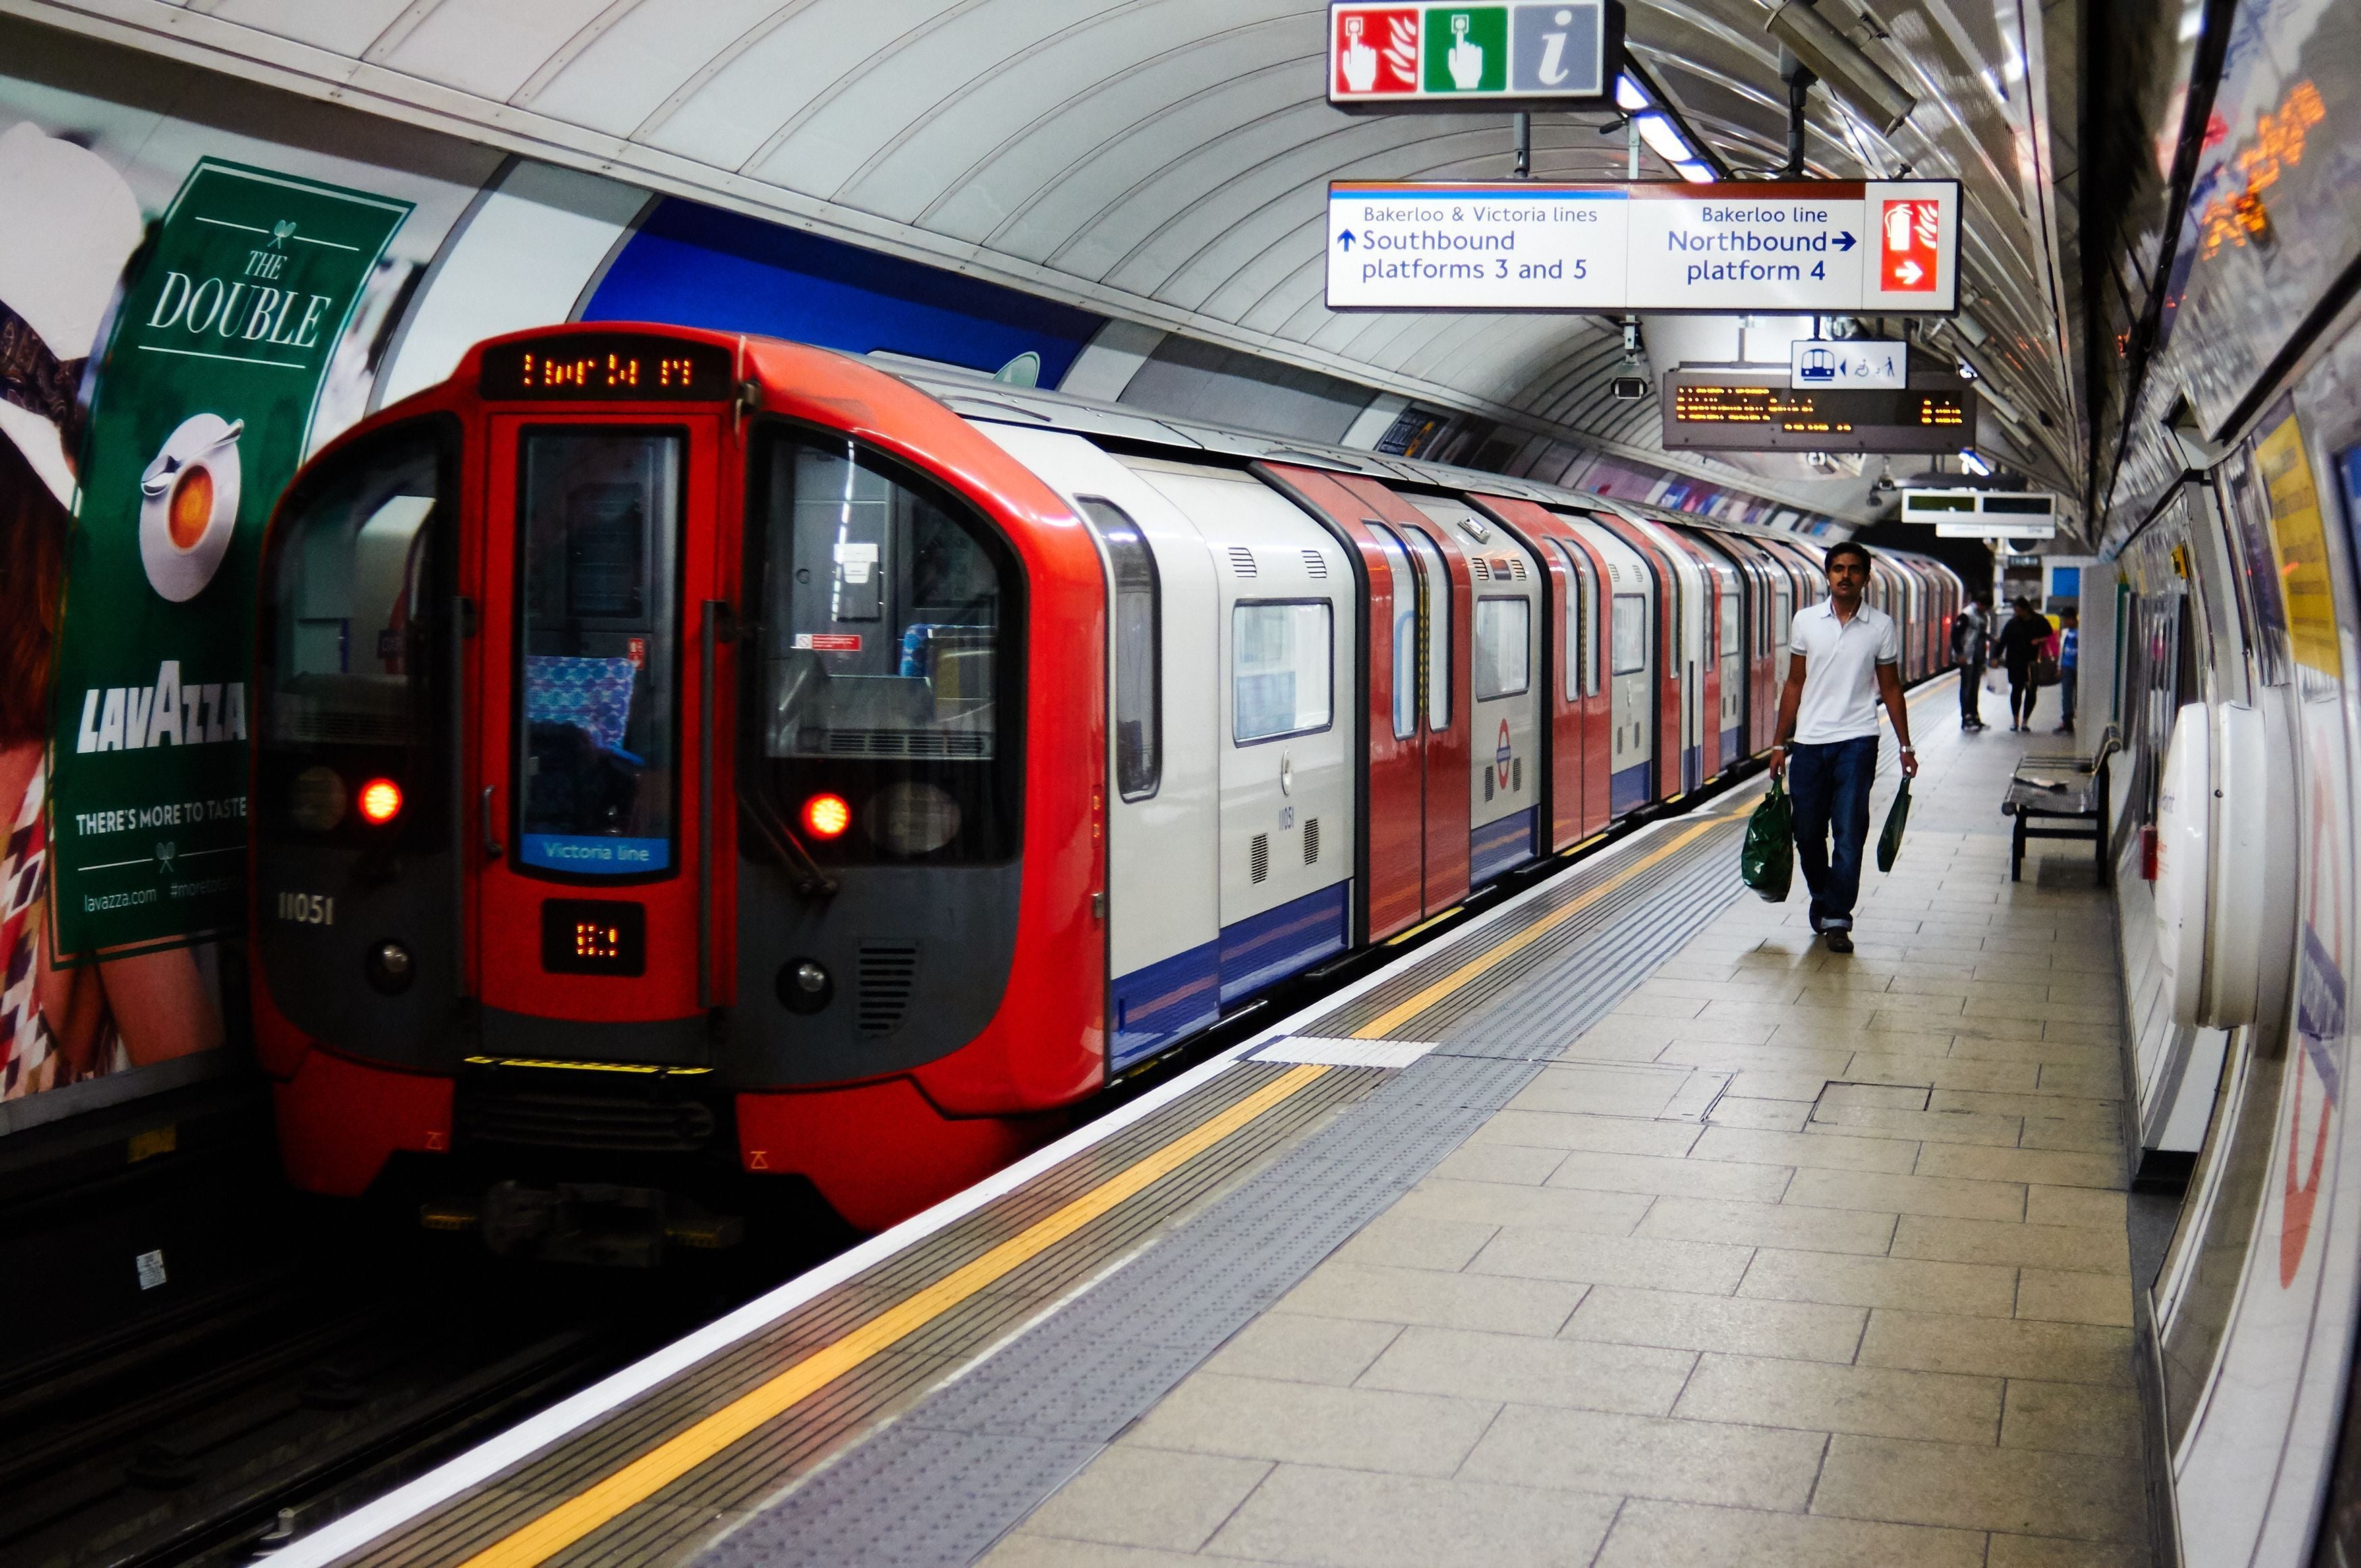 Aslef members on London Underground are also striking on Monday April 8 and Saturday May 4 in a separate dispute over terms and conditions